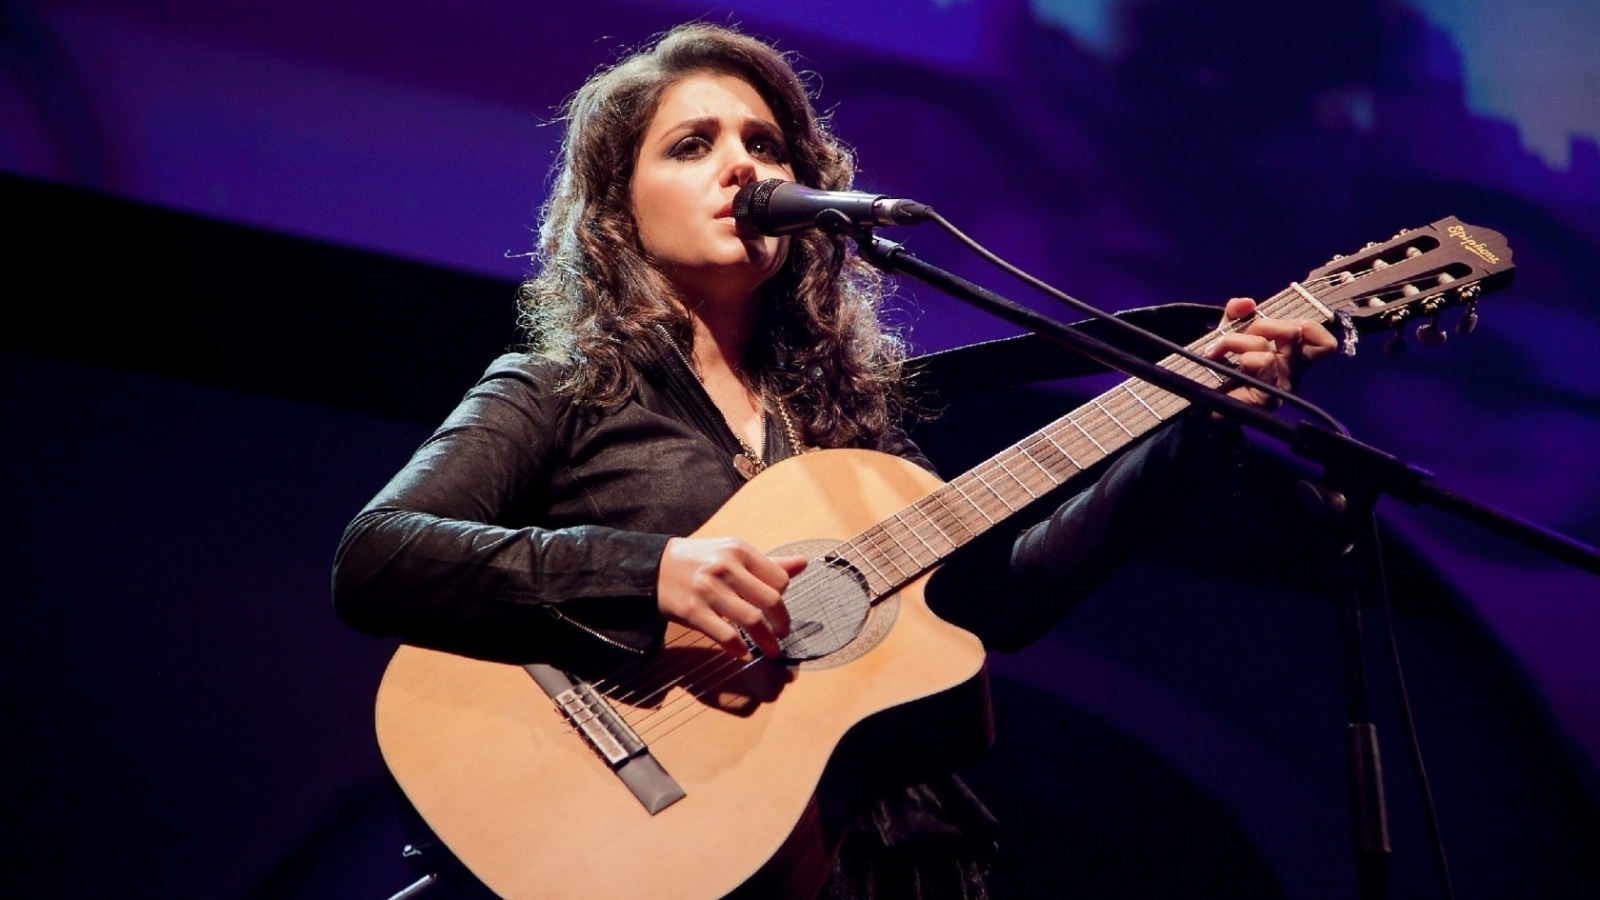 Katie Melua Performing on Stage for 1600 x 900 HDTV resolution